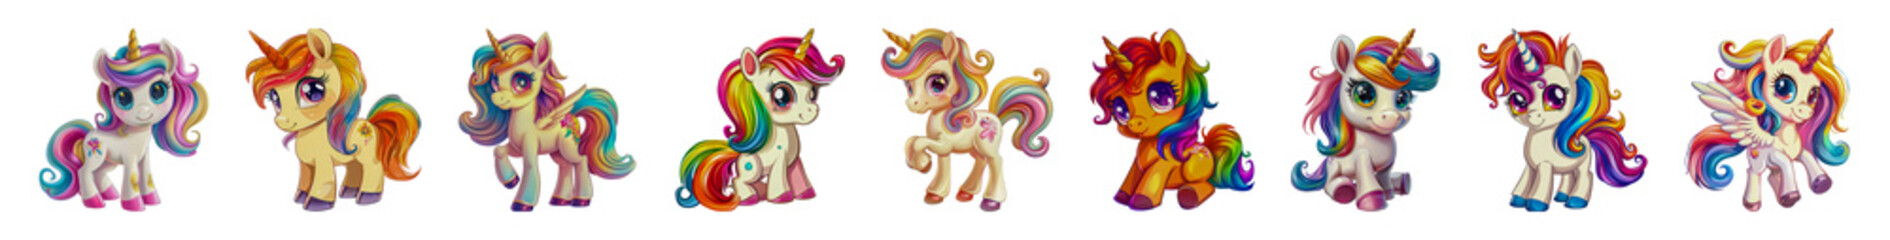 Magical unicorns with colorful manes in various poses cut out png on transparent background